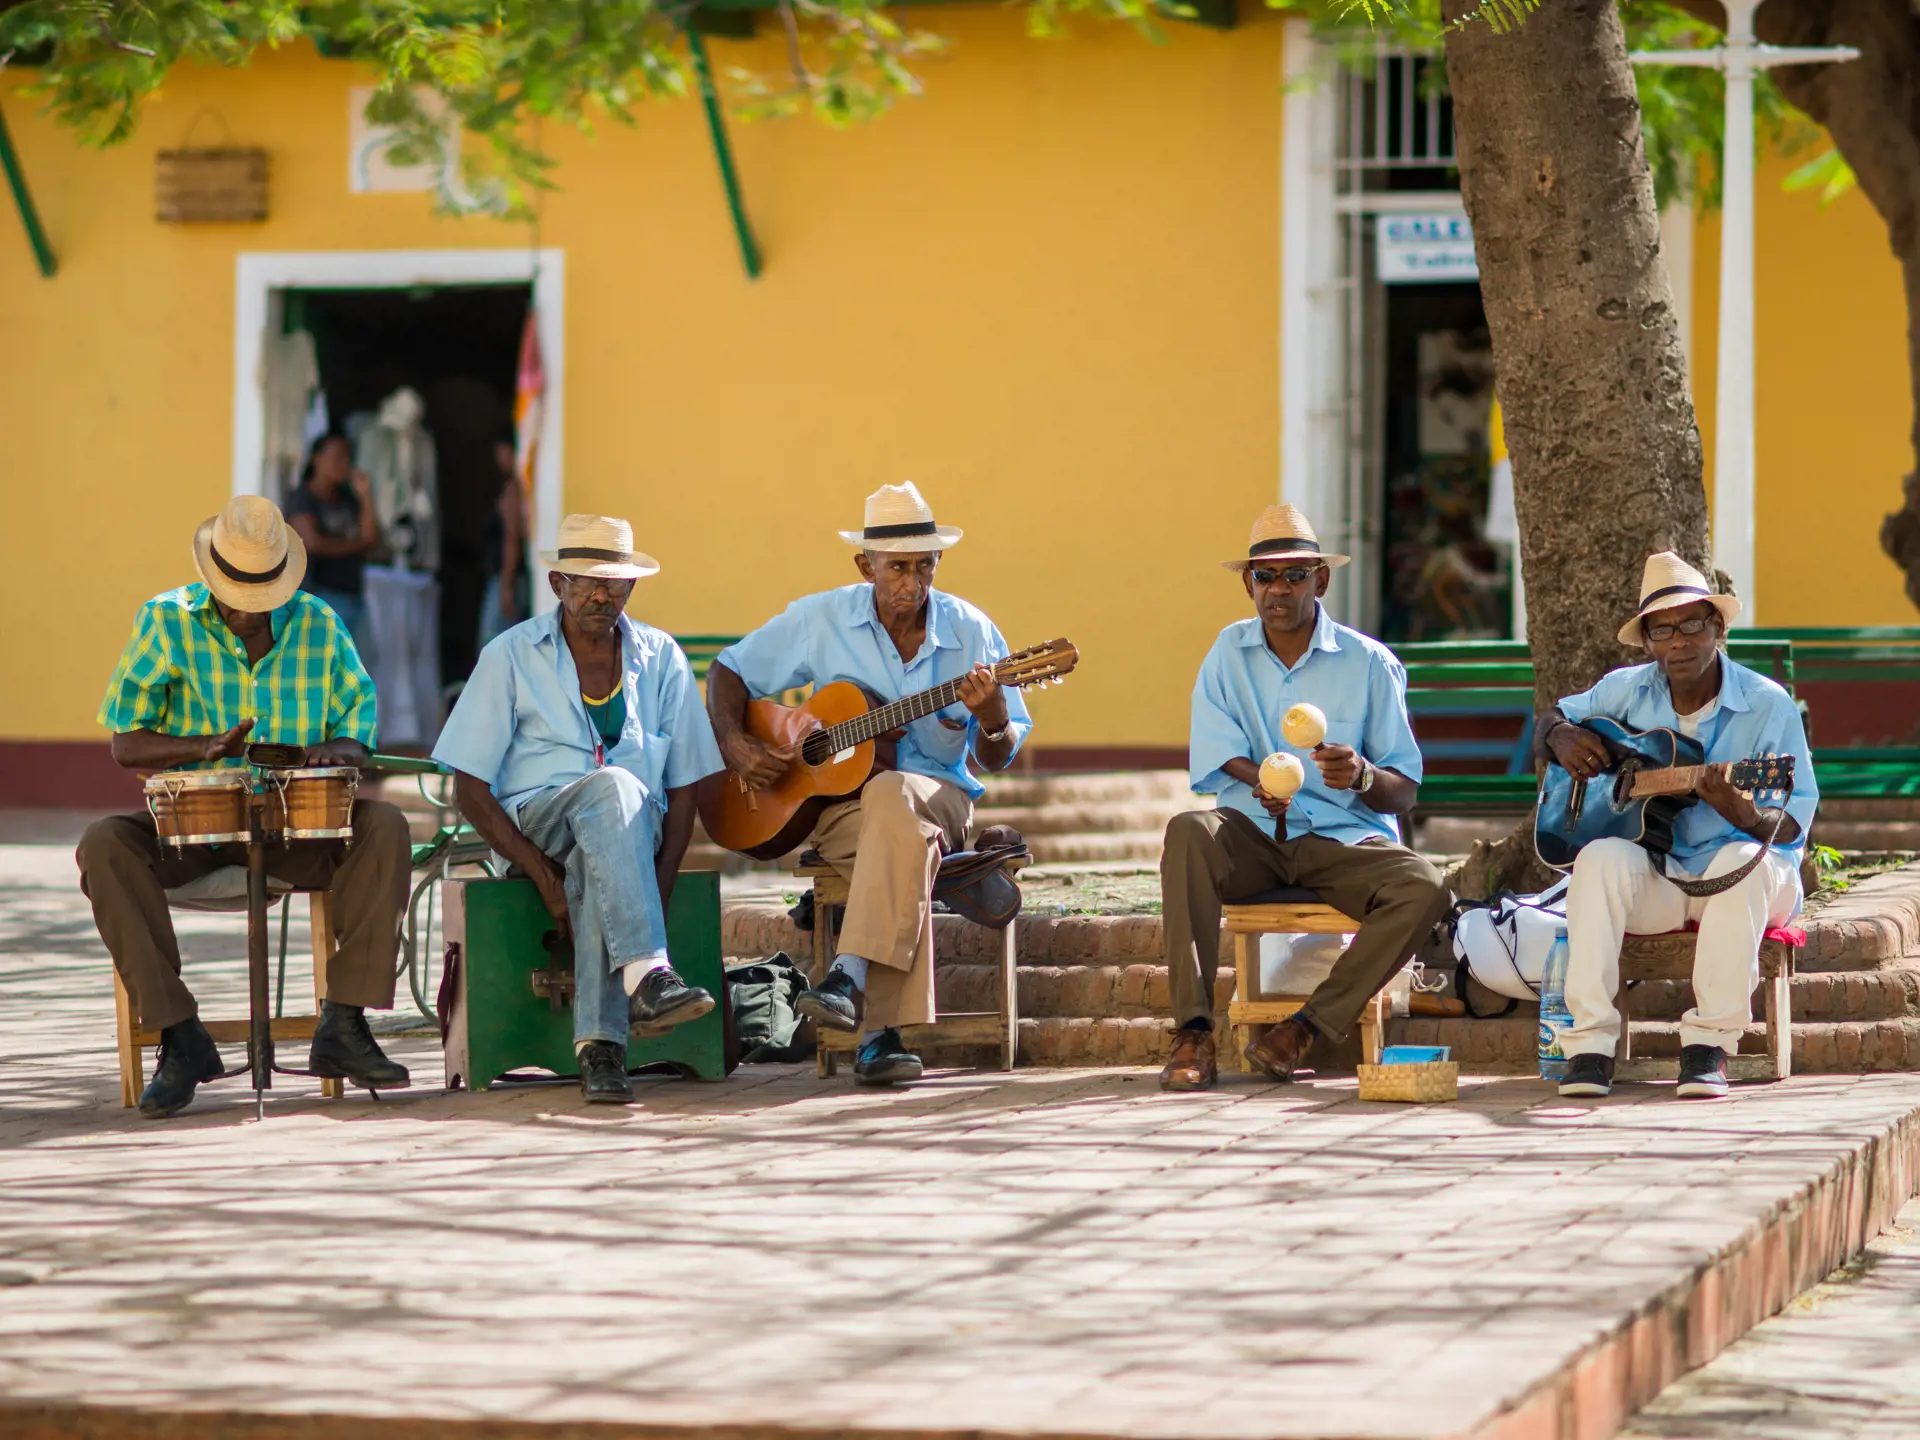 shutterstock_512230474 TRINIDAD, CUBA - APRIL 06, 2014 Group of Latino American men of musicians play on maracases, guitar and small drums a.jpg